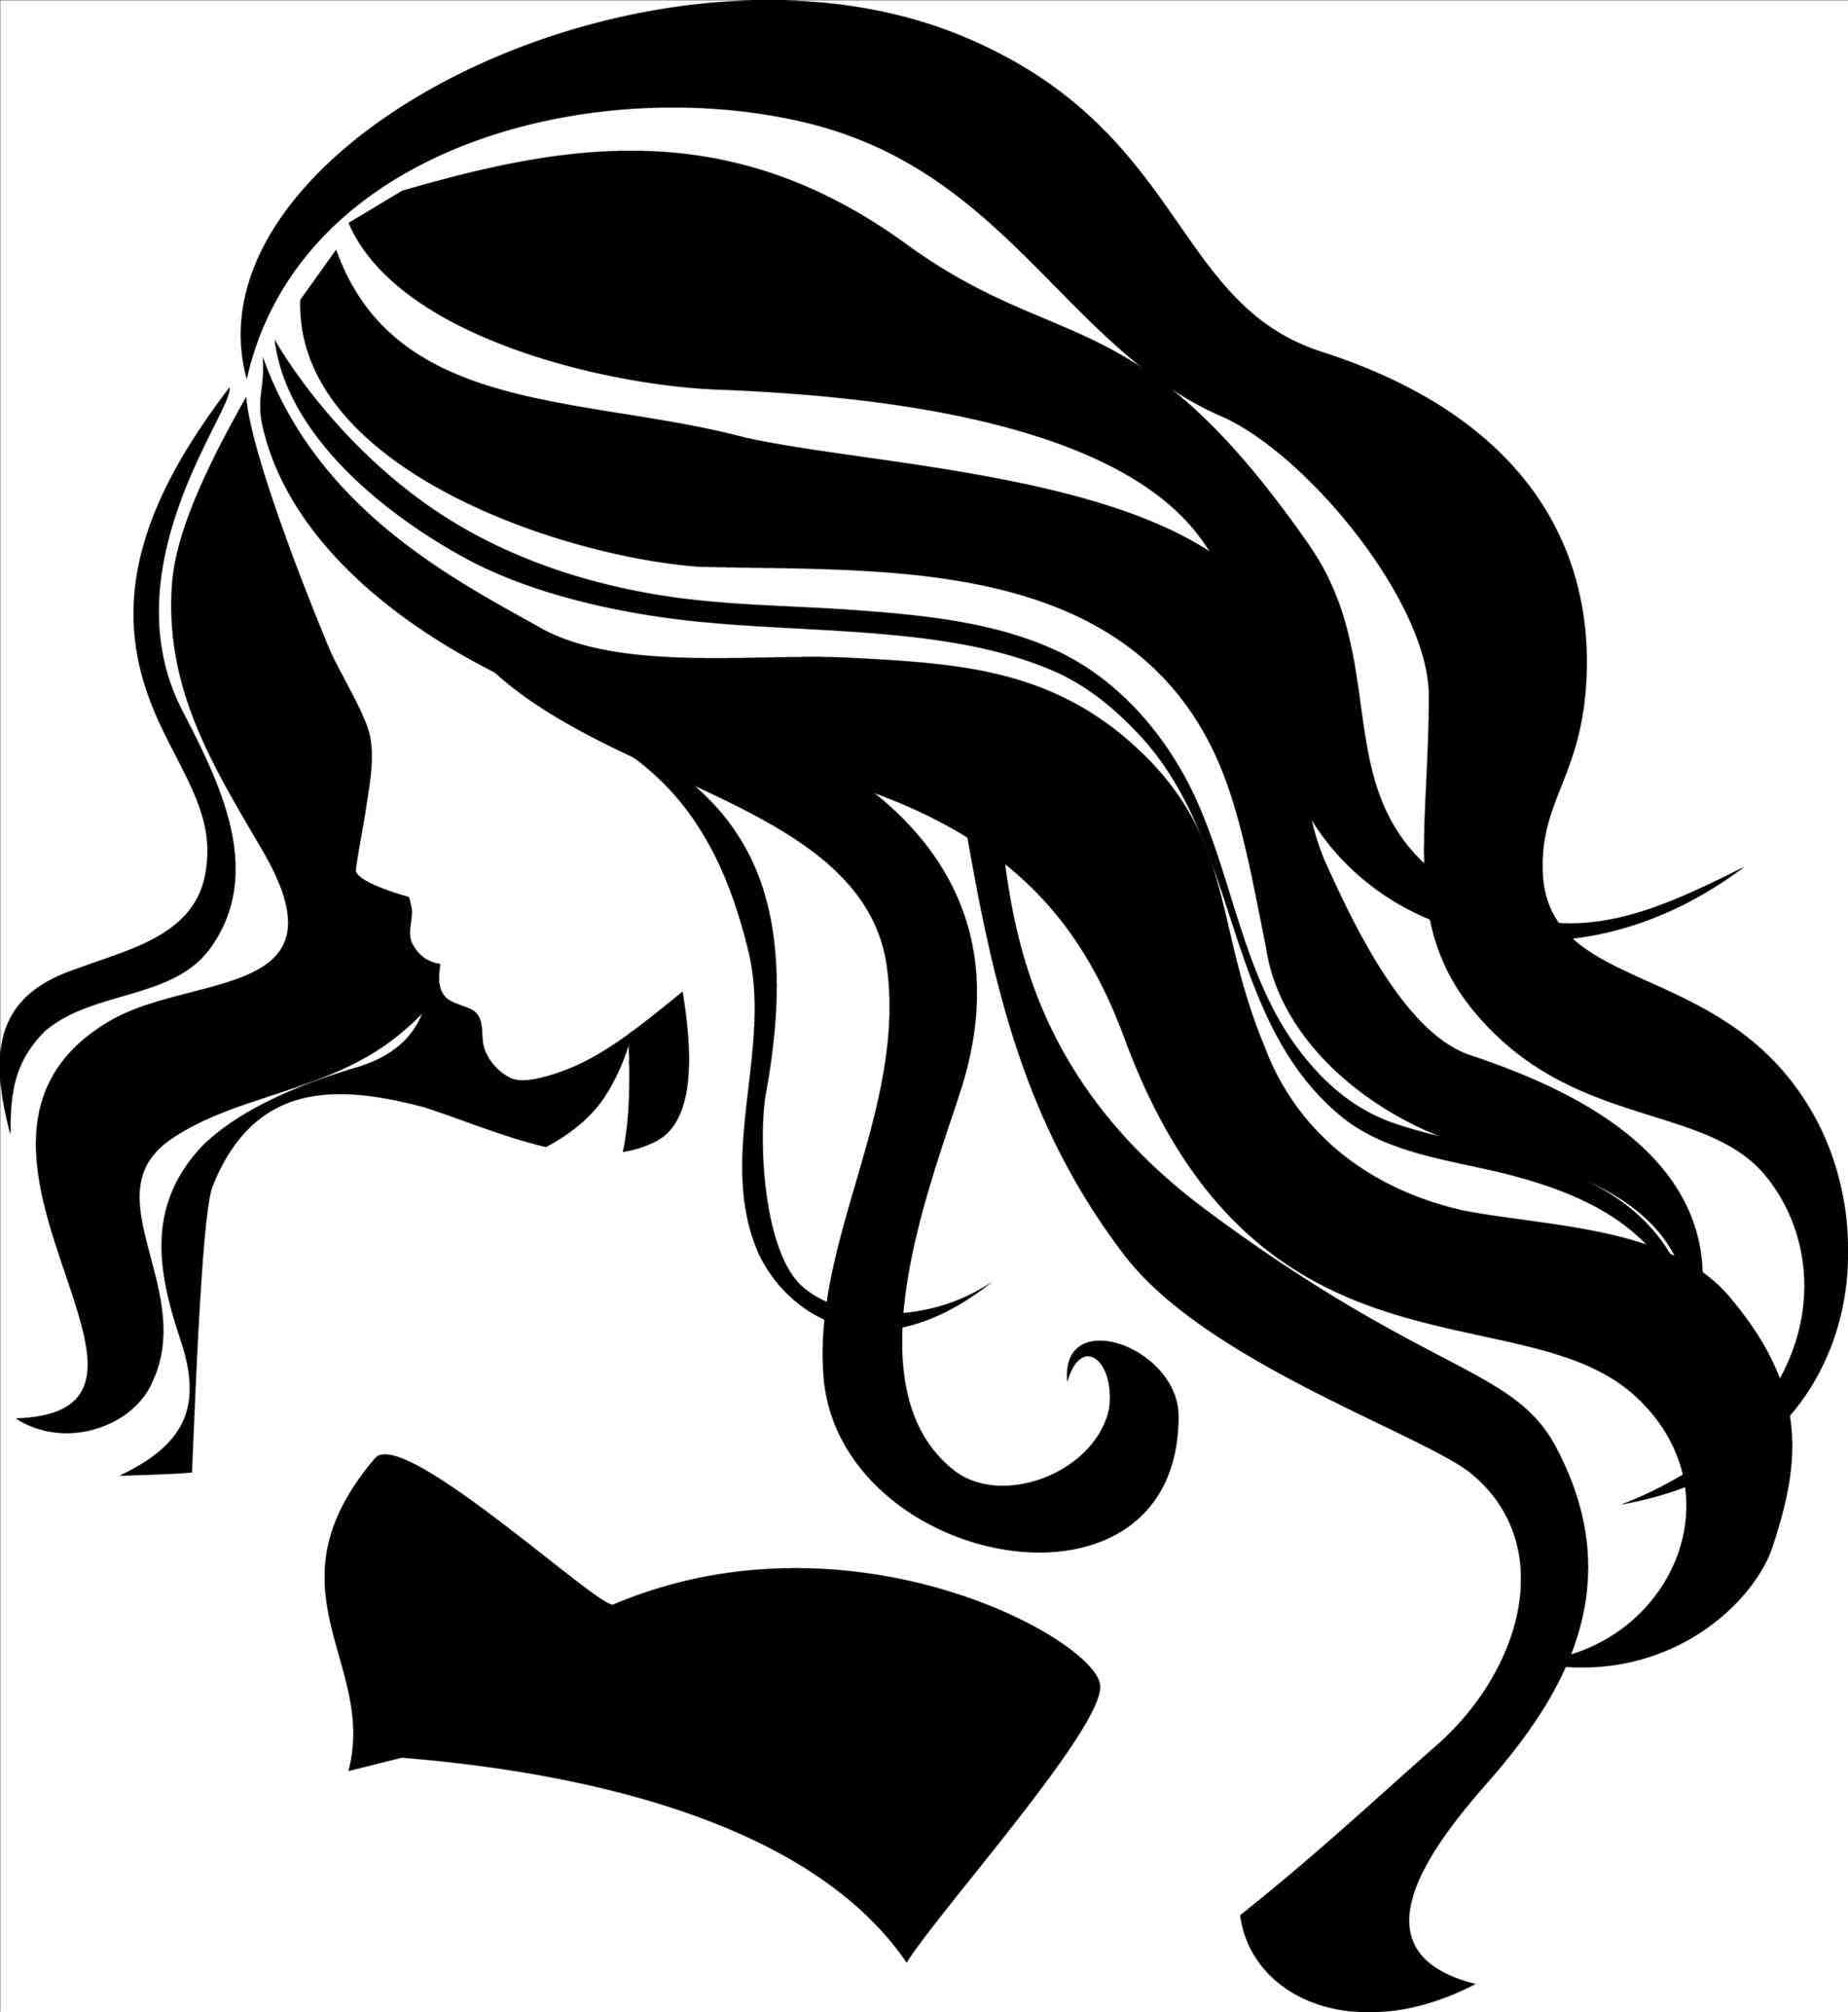 Beauty clipart black and white.  collection of high